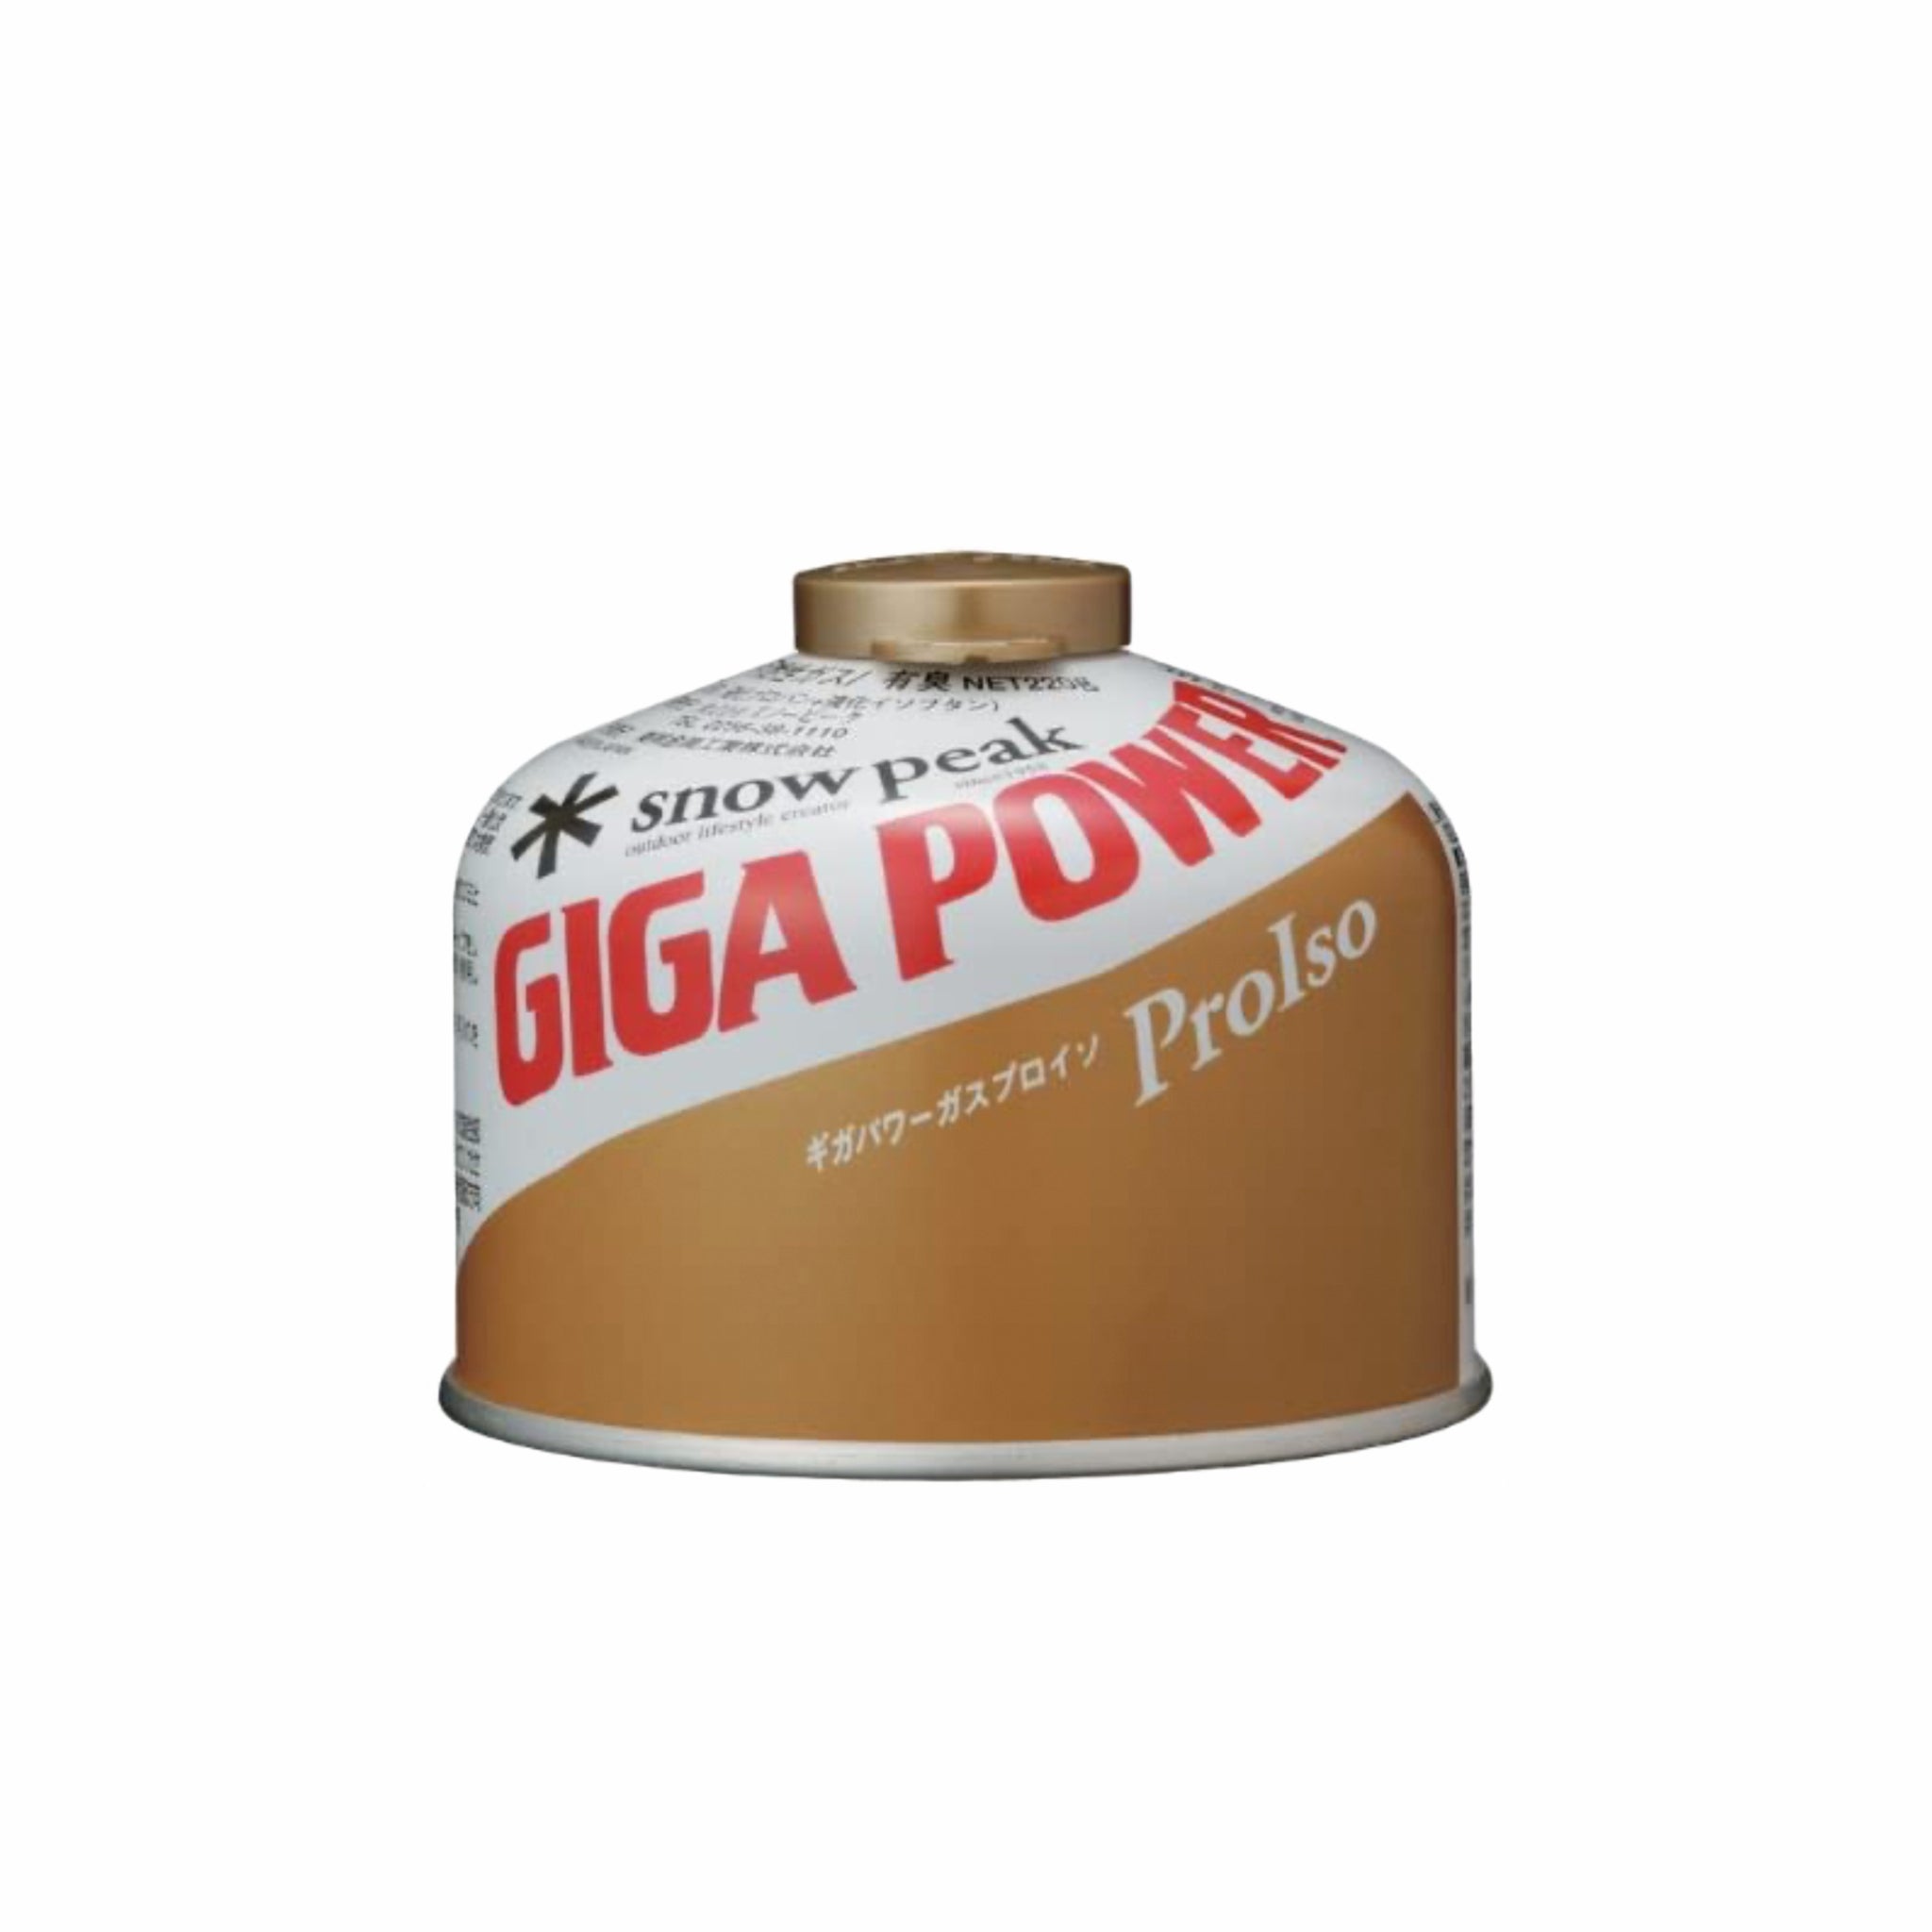 Snow Peak GigaPower 250 Gold Fuel Canister - 220g - August Shop